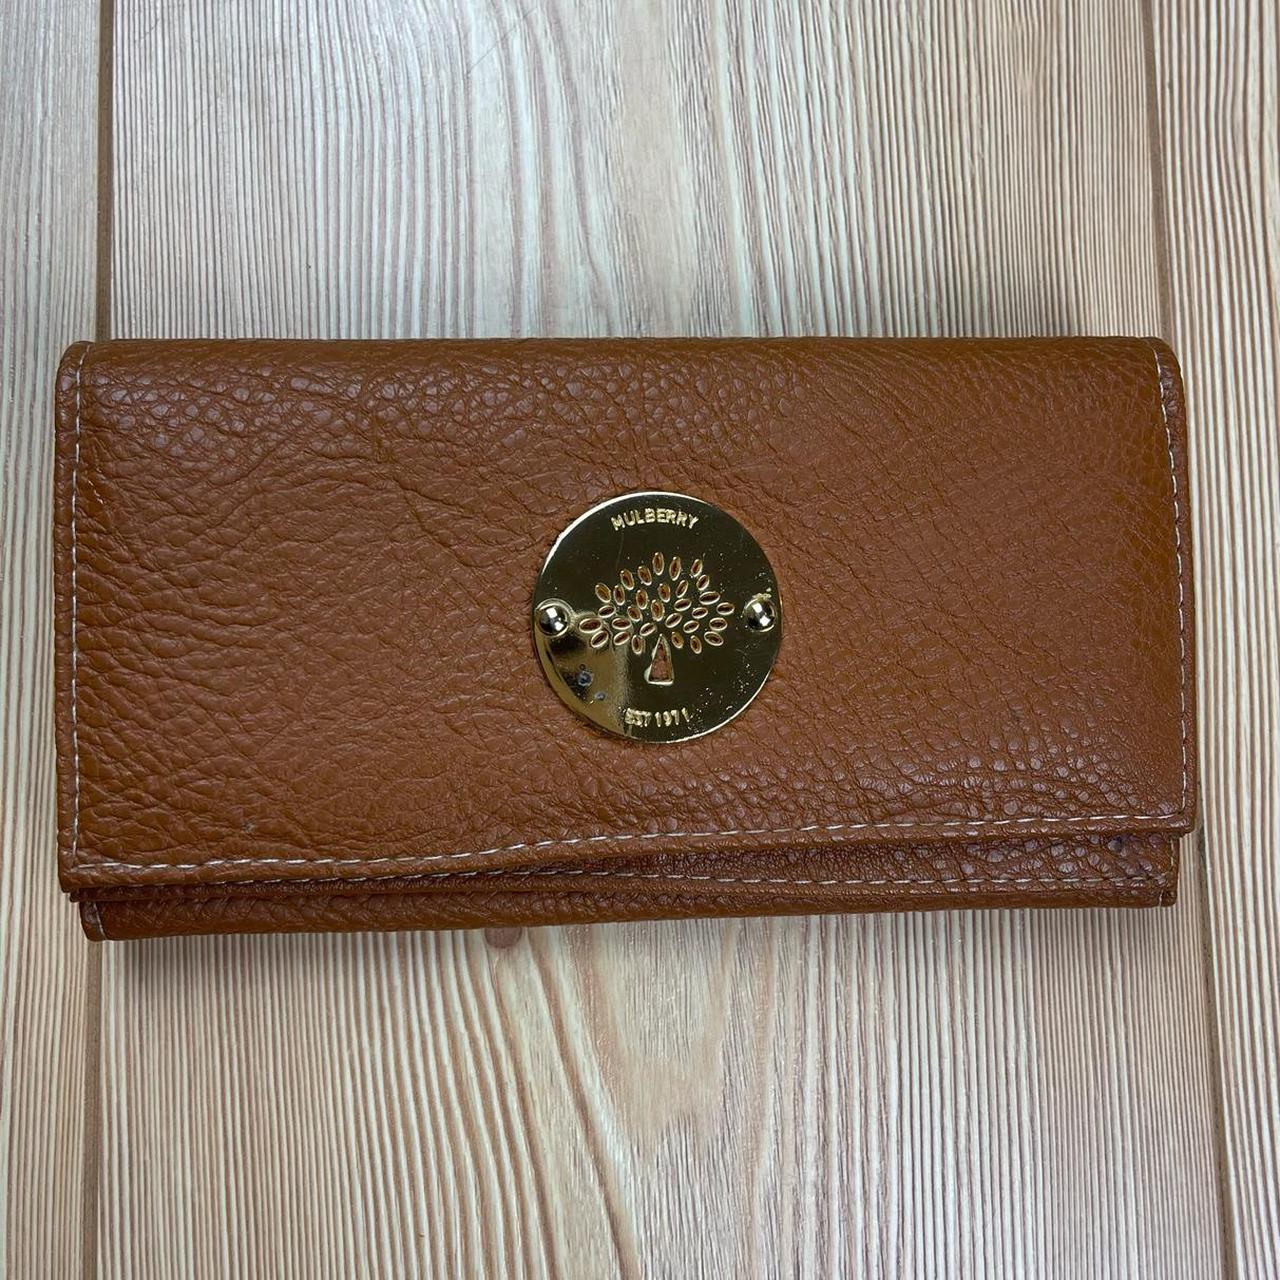 Vintage Mulberry 